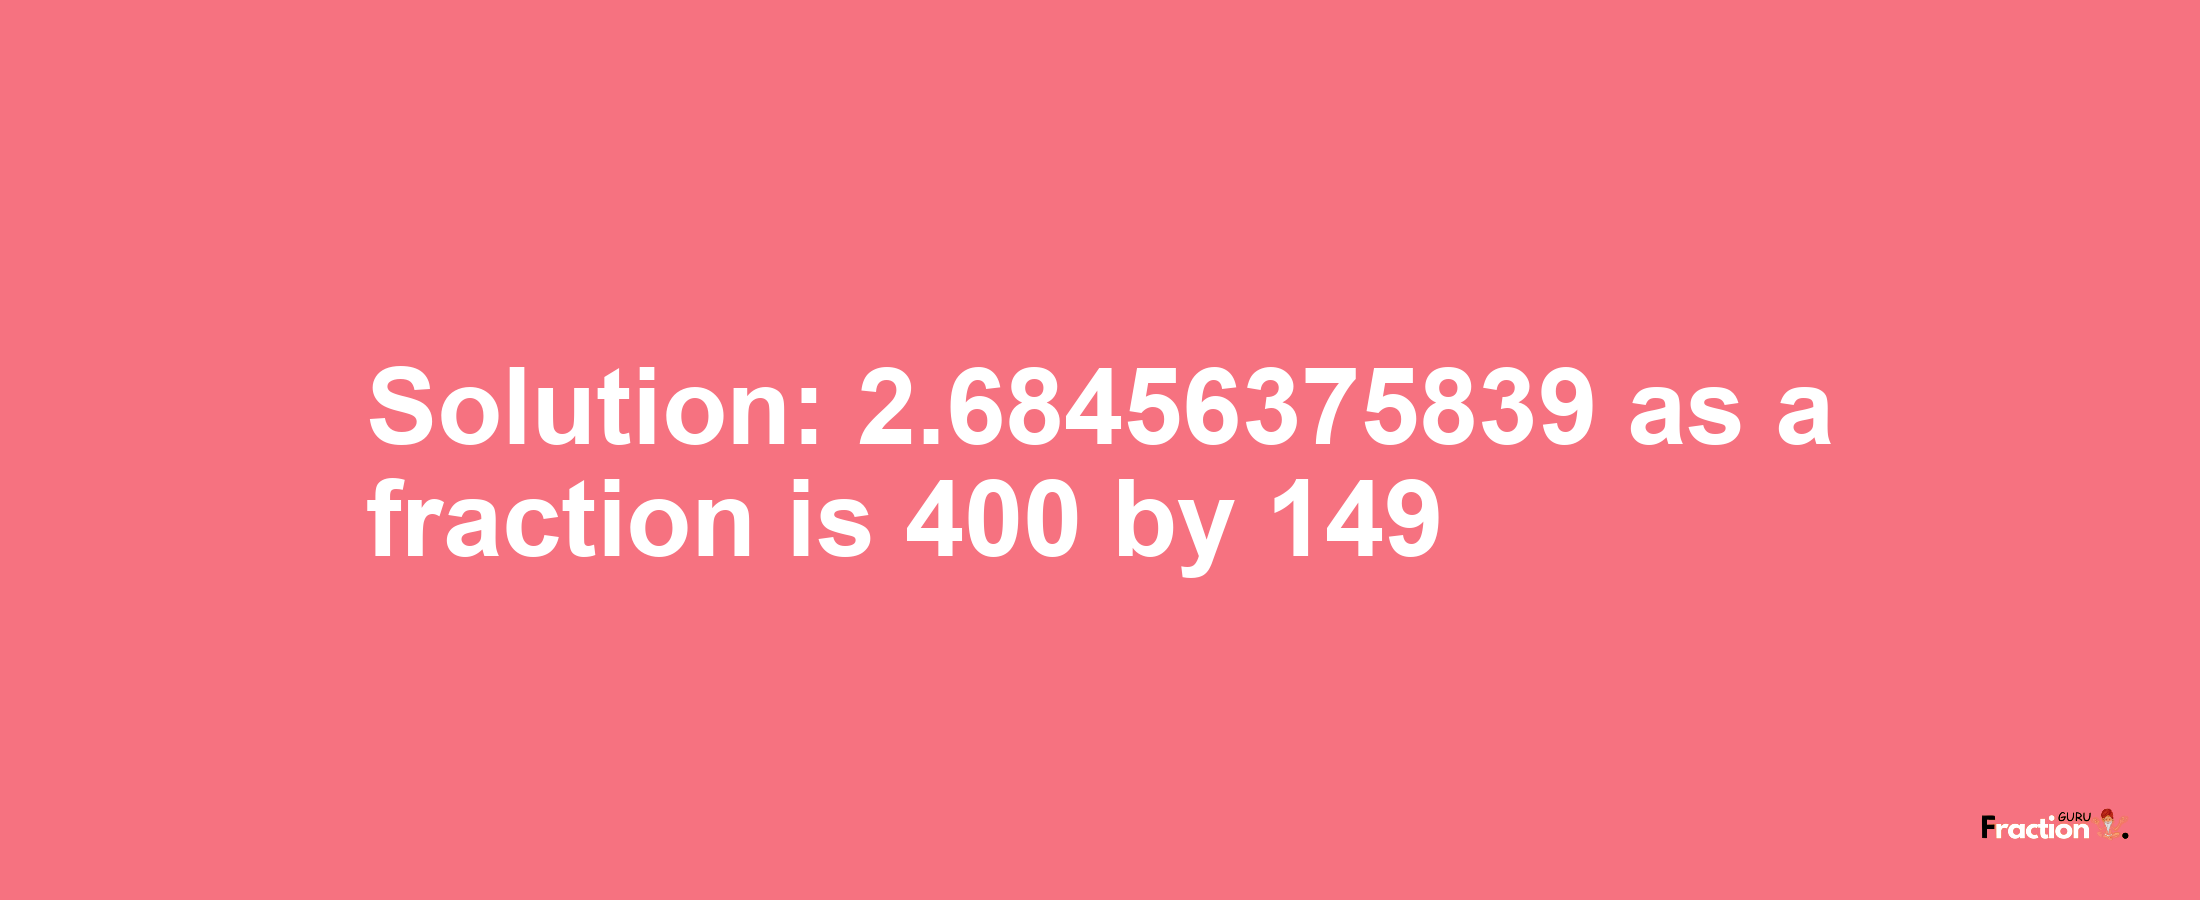 Solution:2.68456375839 as a fraction is 400/149